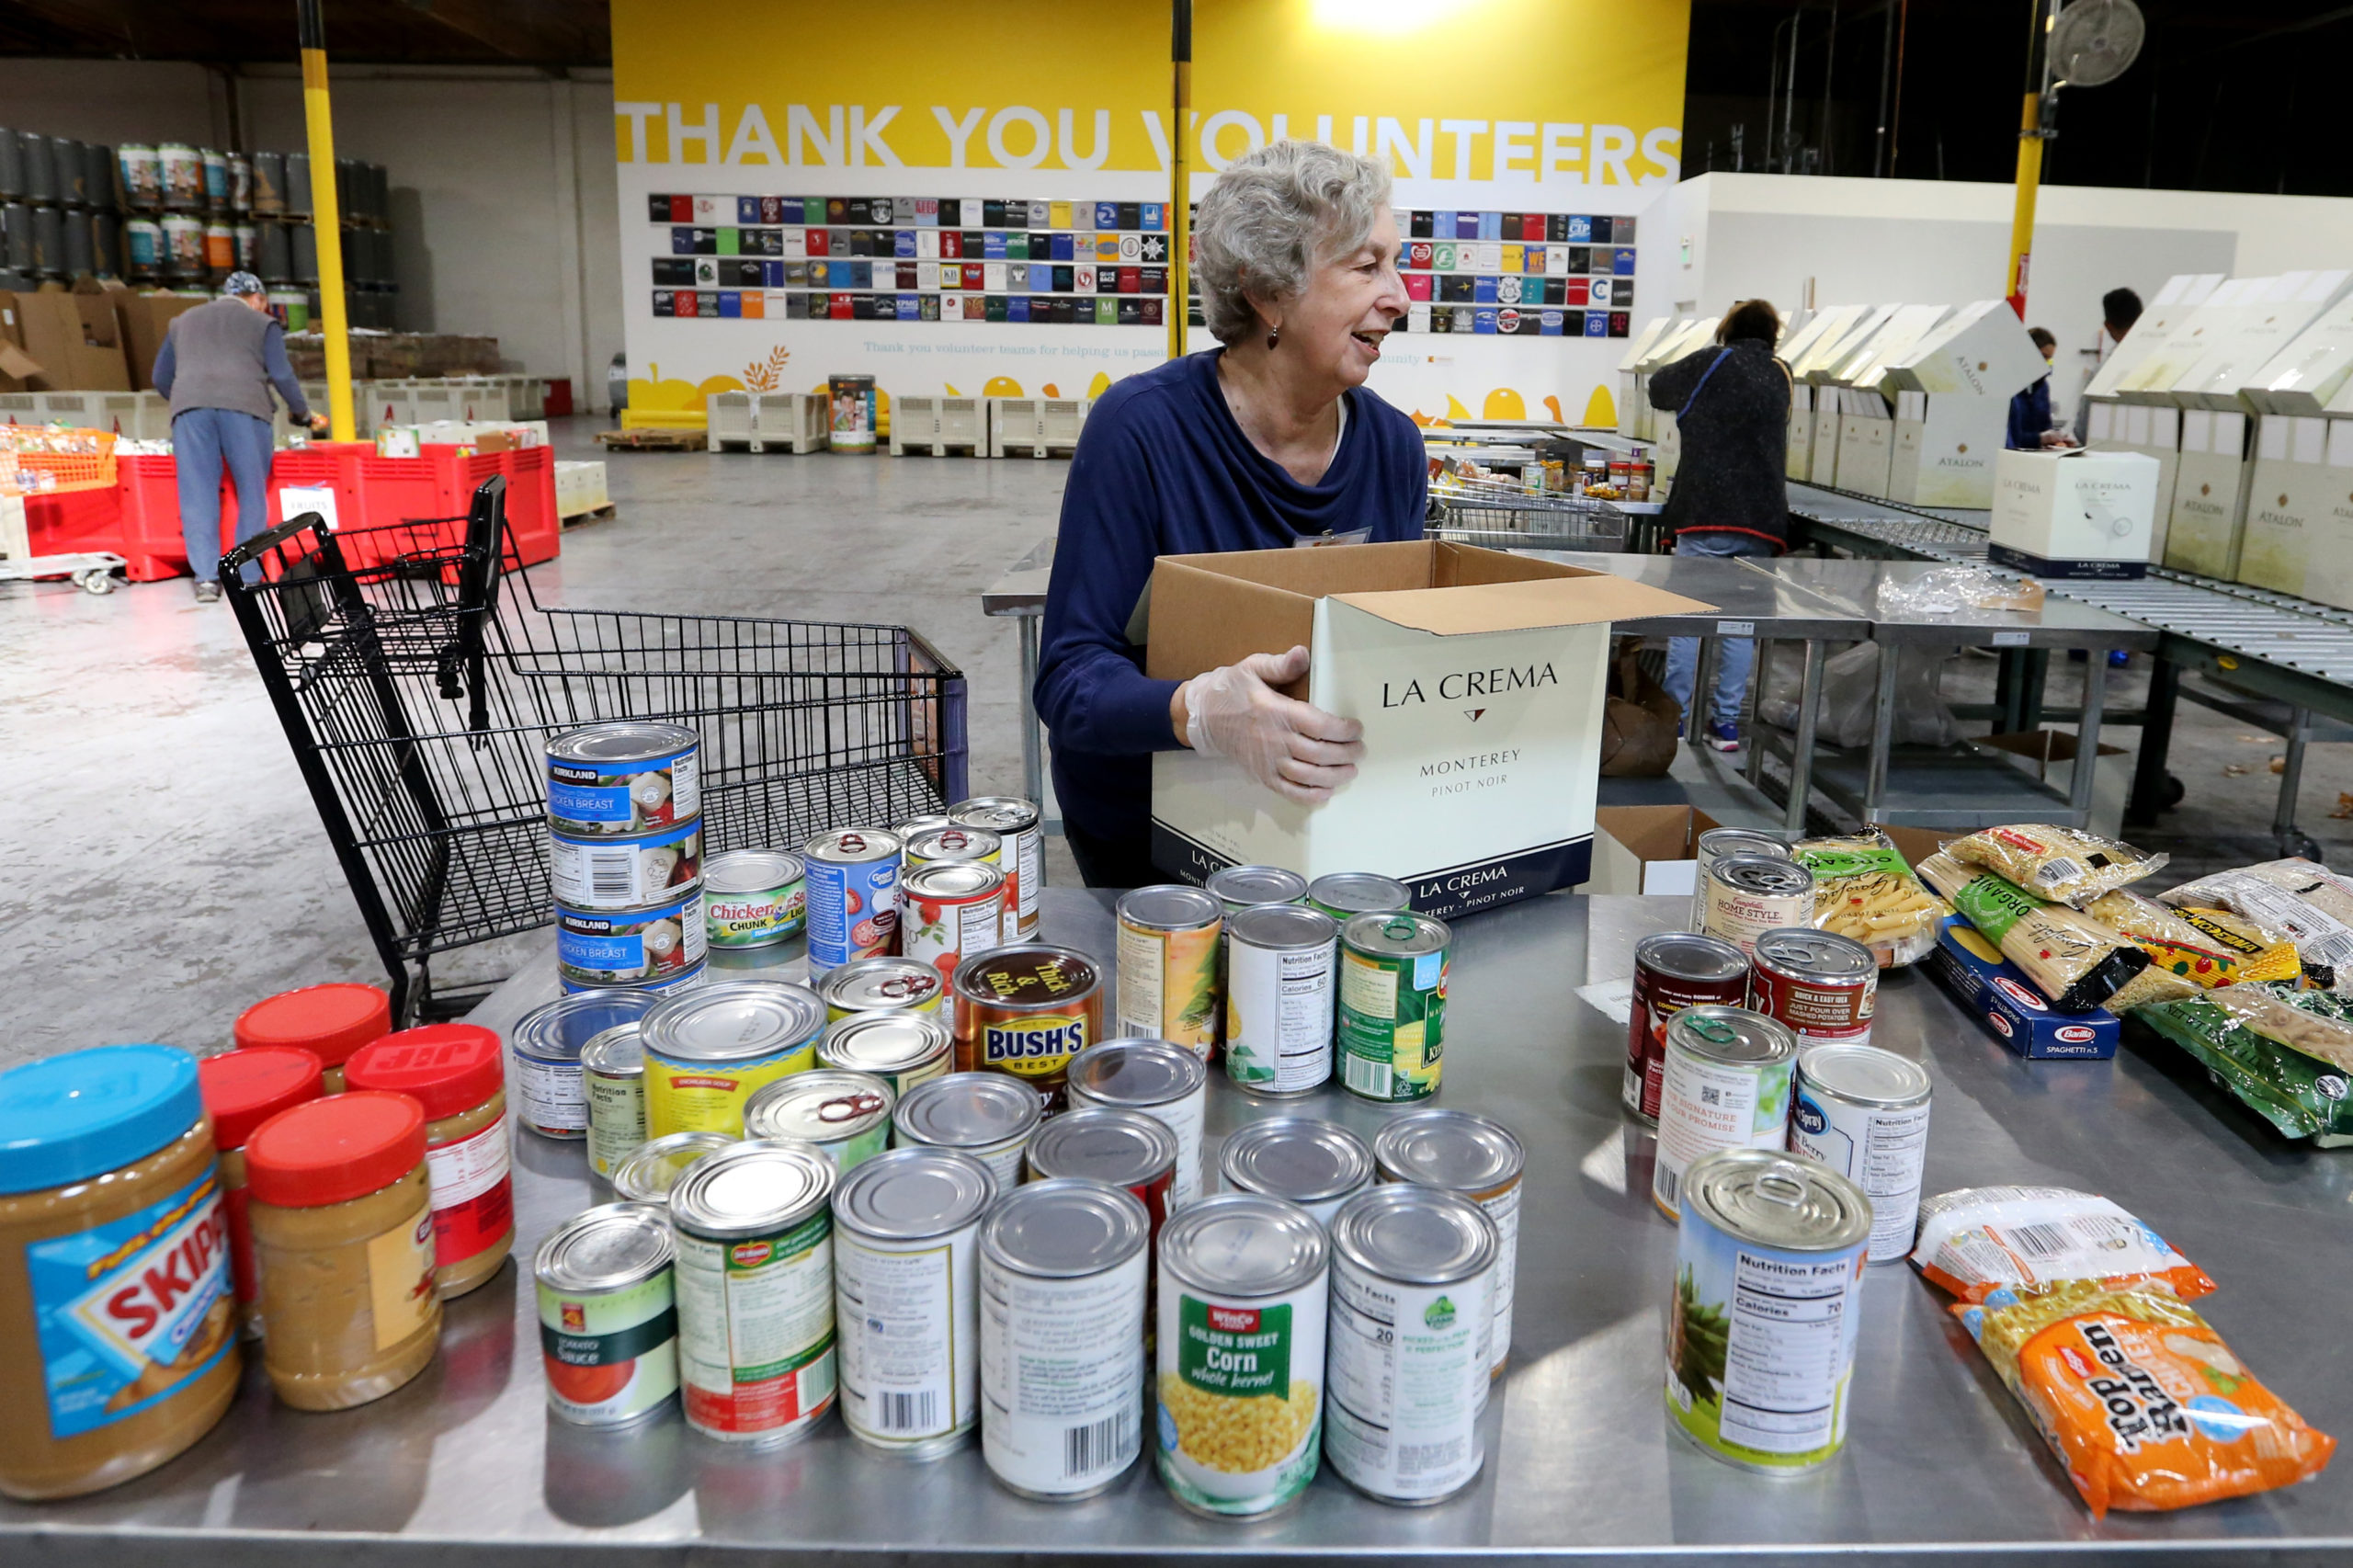 OAKLAND, CALIFORNIA - DECEMBER 13: Joyce Baird, of Berkeley, fills boxes with groceries at Alameda County Food Bank in Oakland, Calif., on Thursday, Dec. 13, 2018. Baird volunteers once a week, she said. (Ray Chavez/Bay Area News Group)